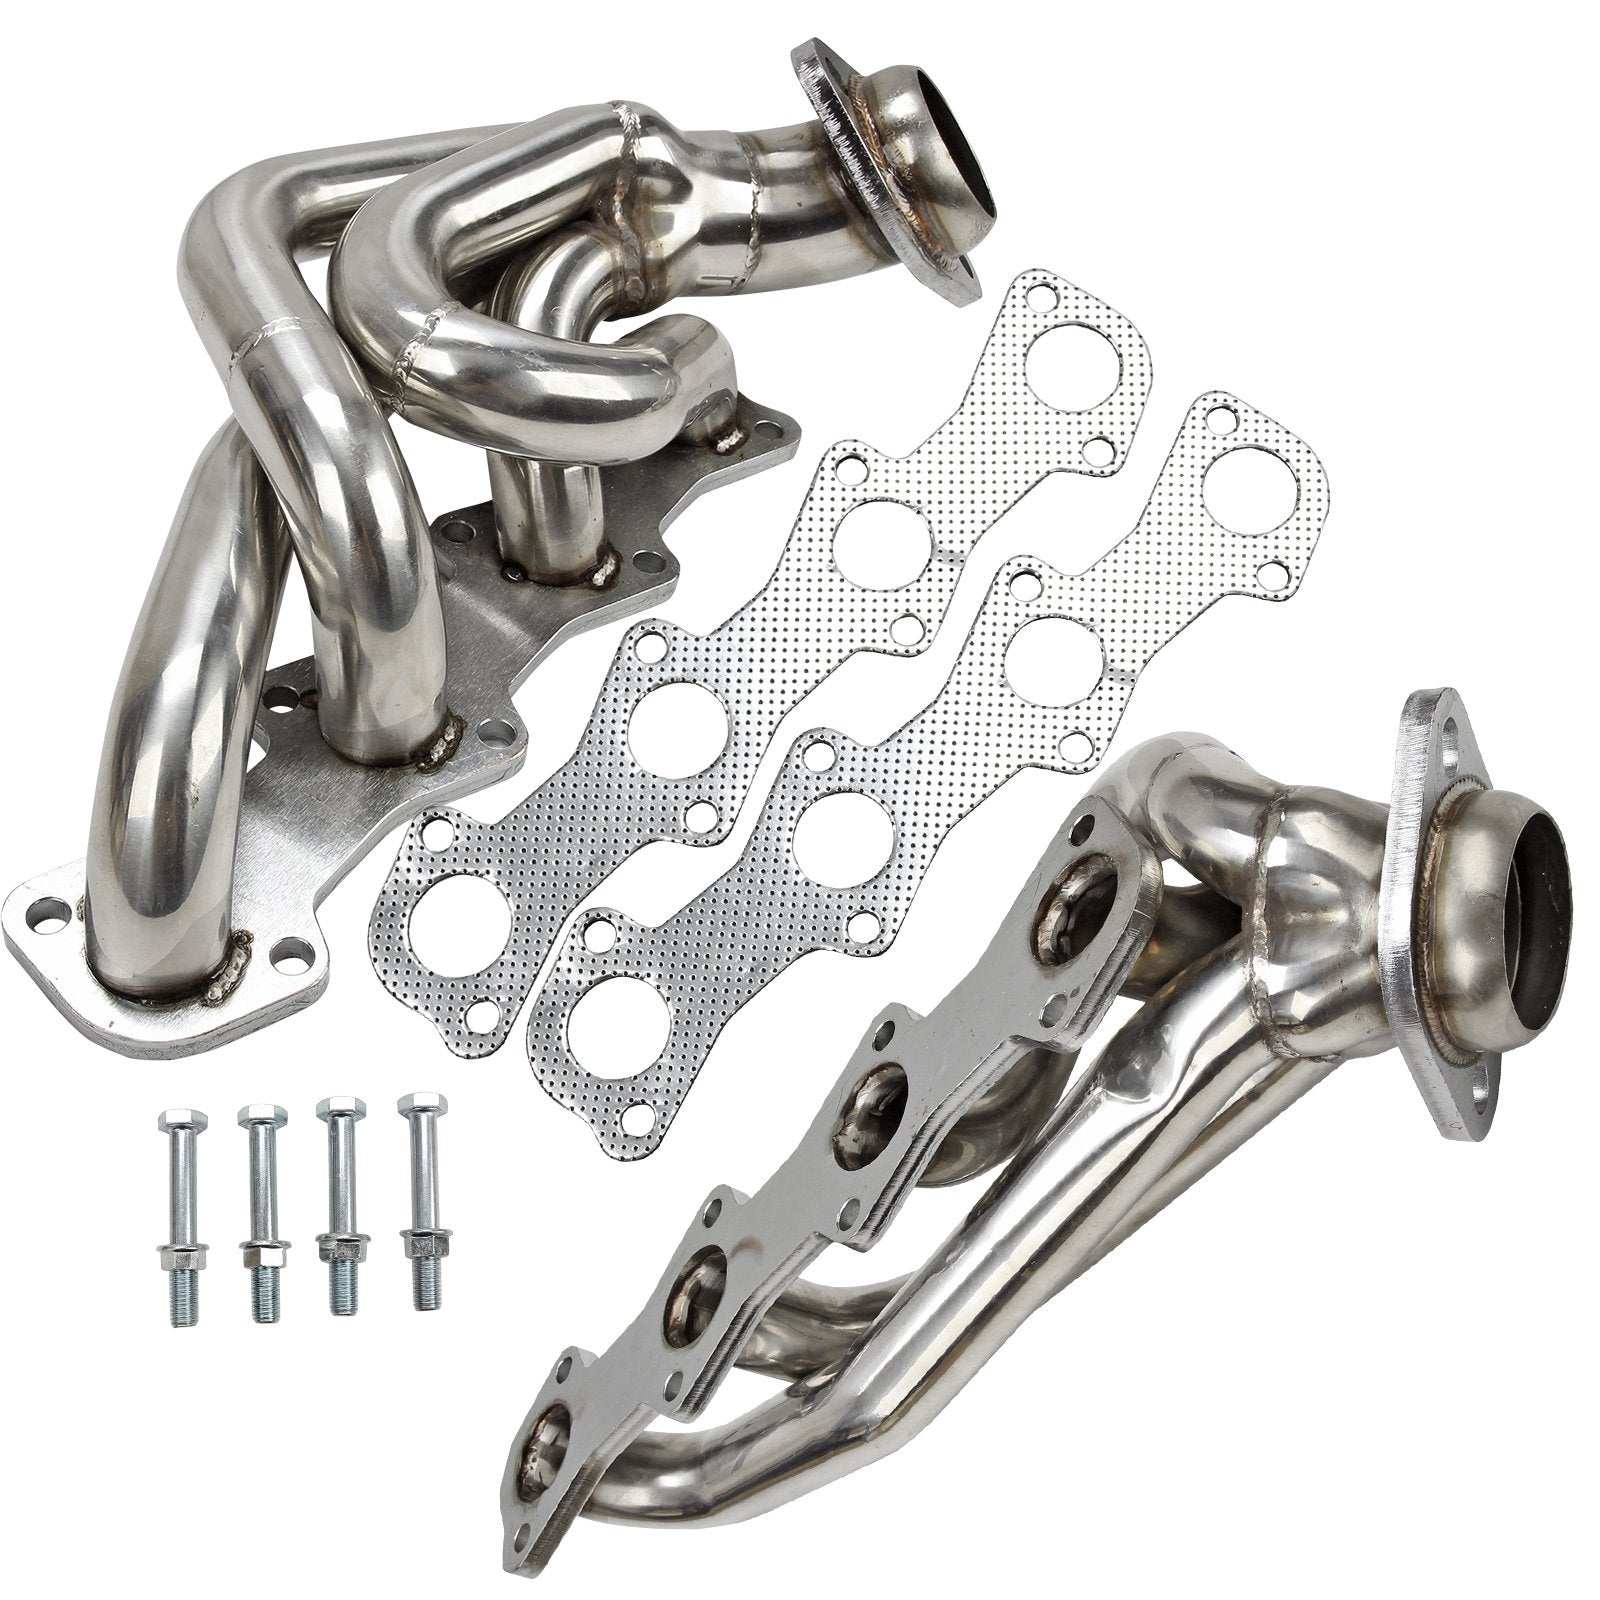 Exhaust Shorty Header For 1997-2003 Ford F150 F250 V8 4.6L